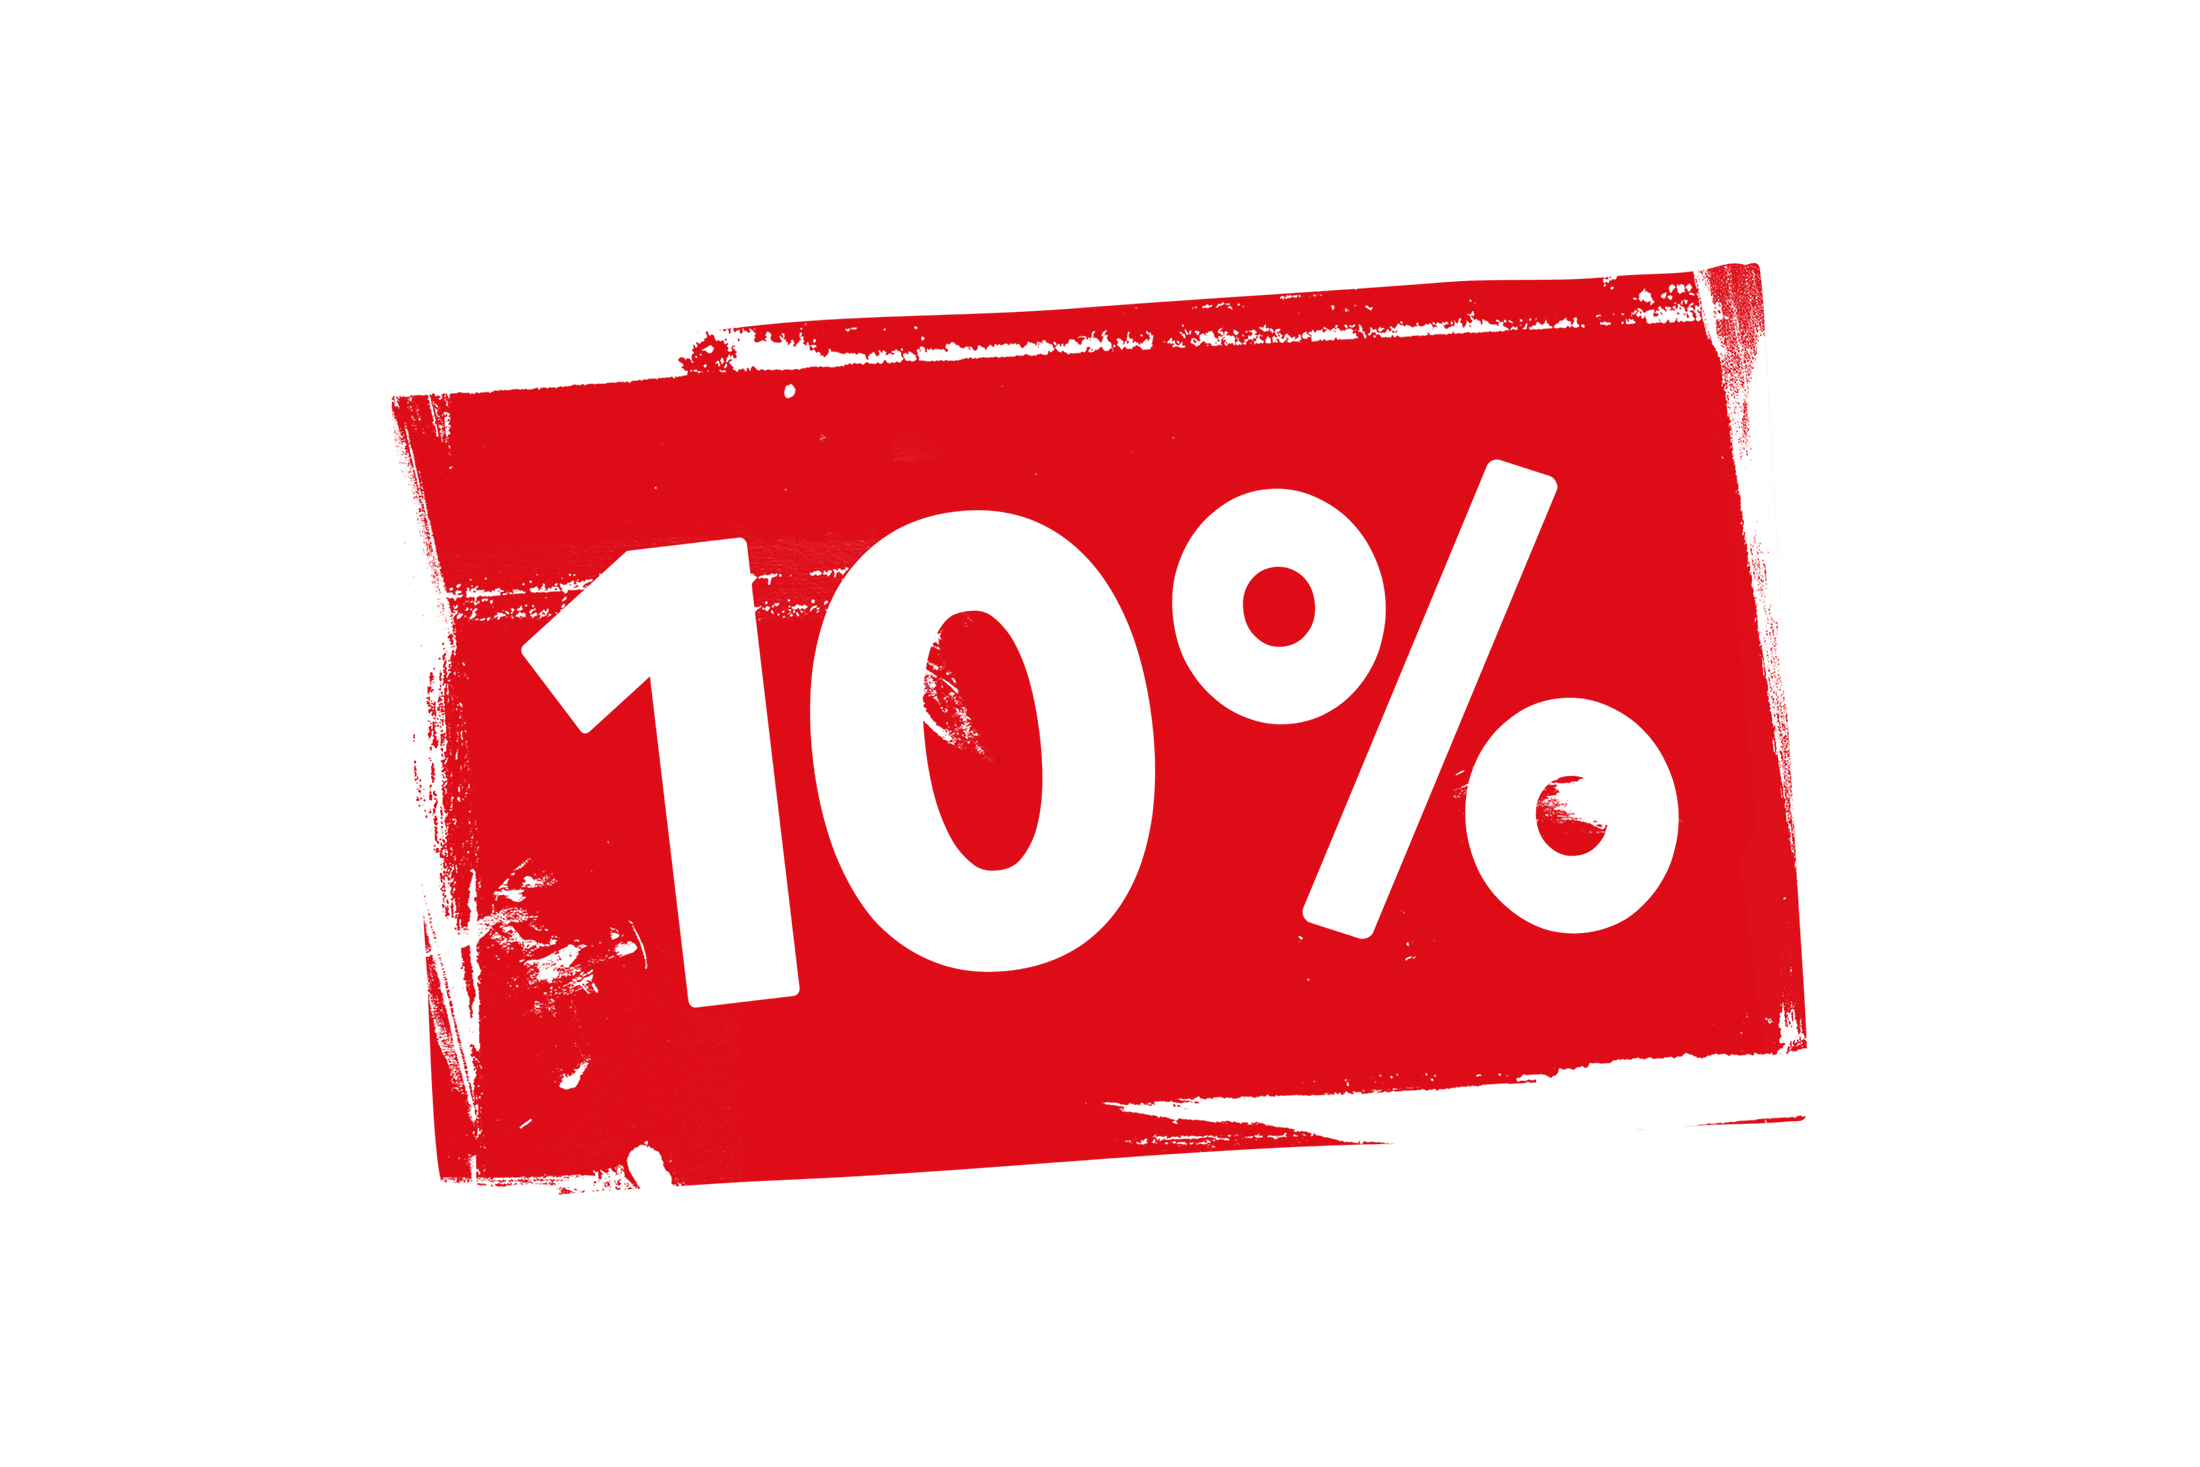 Grunge 10 percent label PNG and PSD